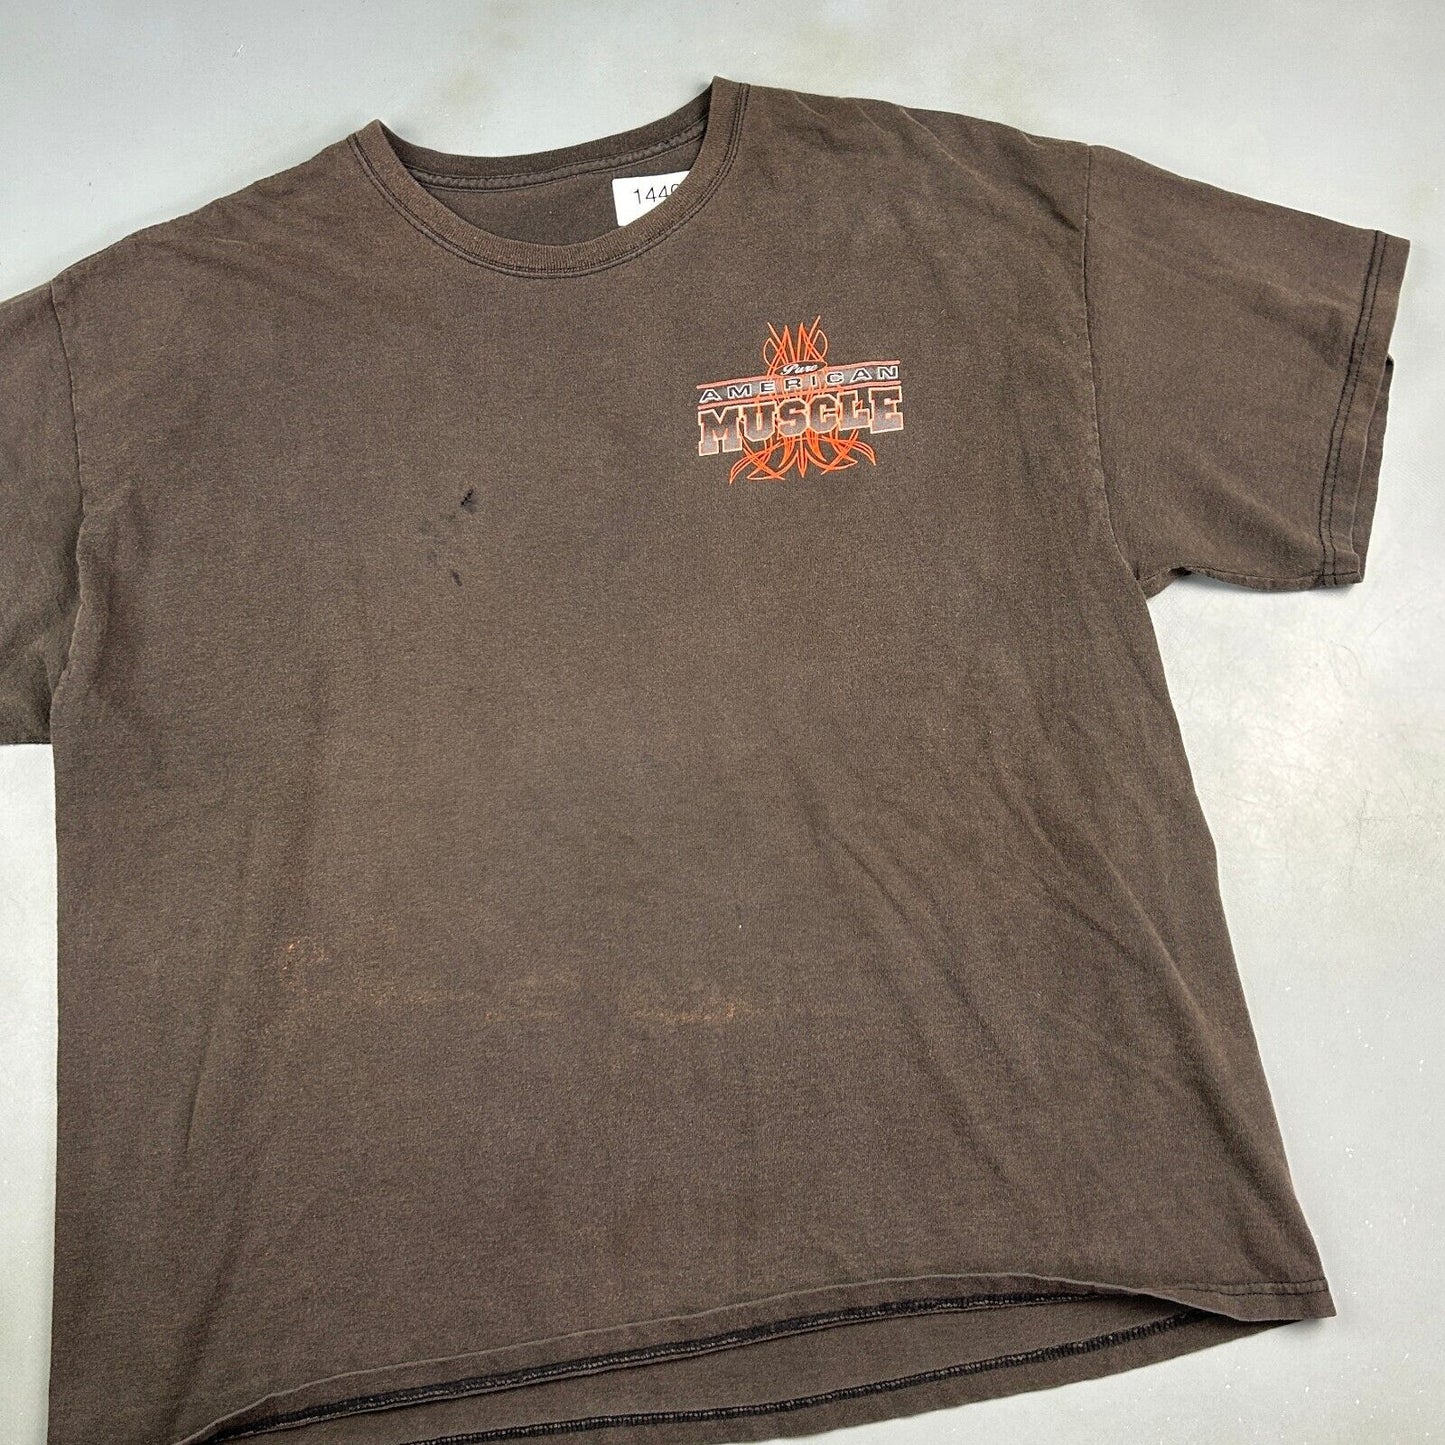 VINTAGE Pure American Muscle Faded Black Car T-Shirt sz XXL Adult